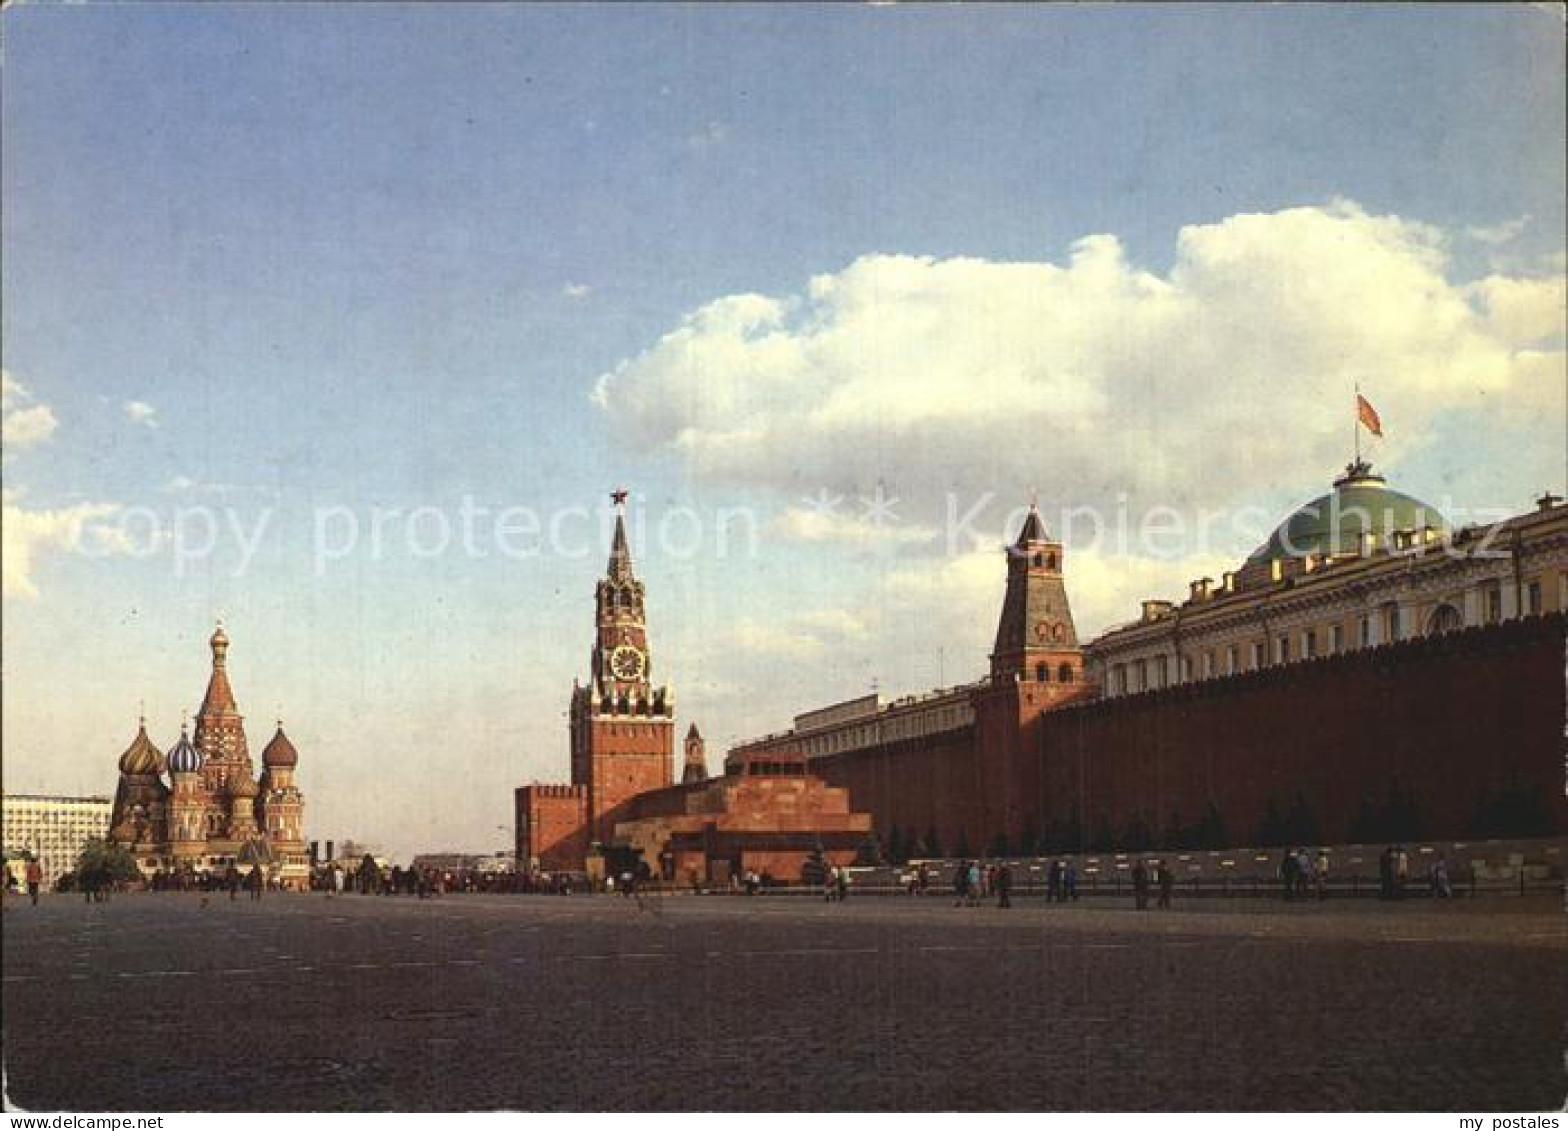 72498229 Moscow Moskva Red Square   - Russia